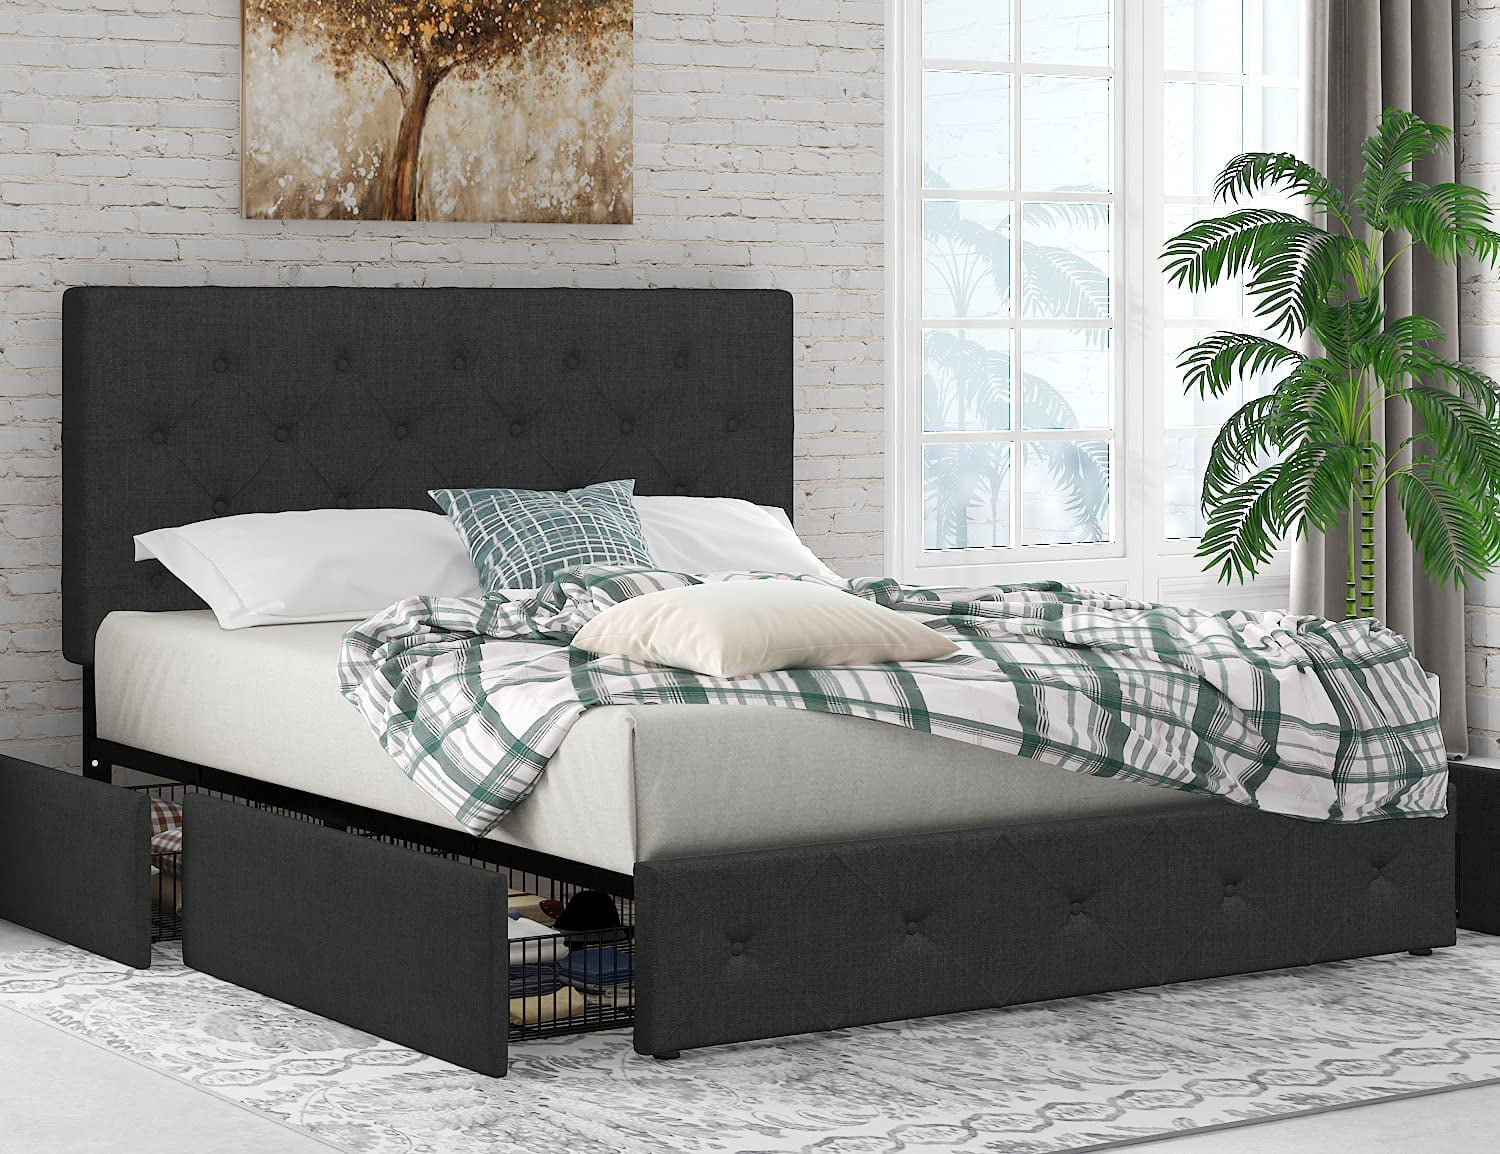 Queen Size Bed Frame Platform Bedroom Charcoal Gray Upholstered Stable Headboard 